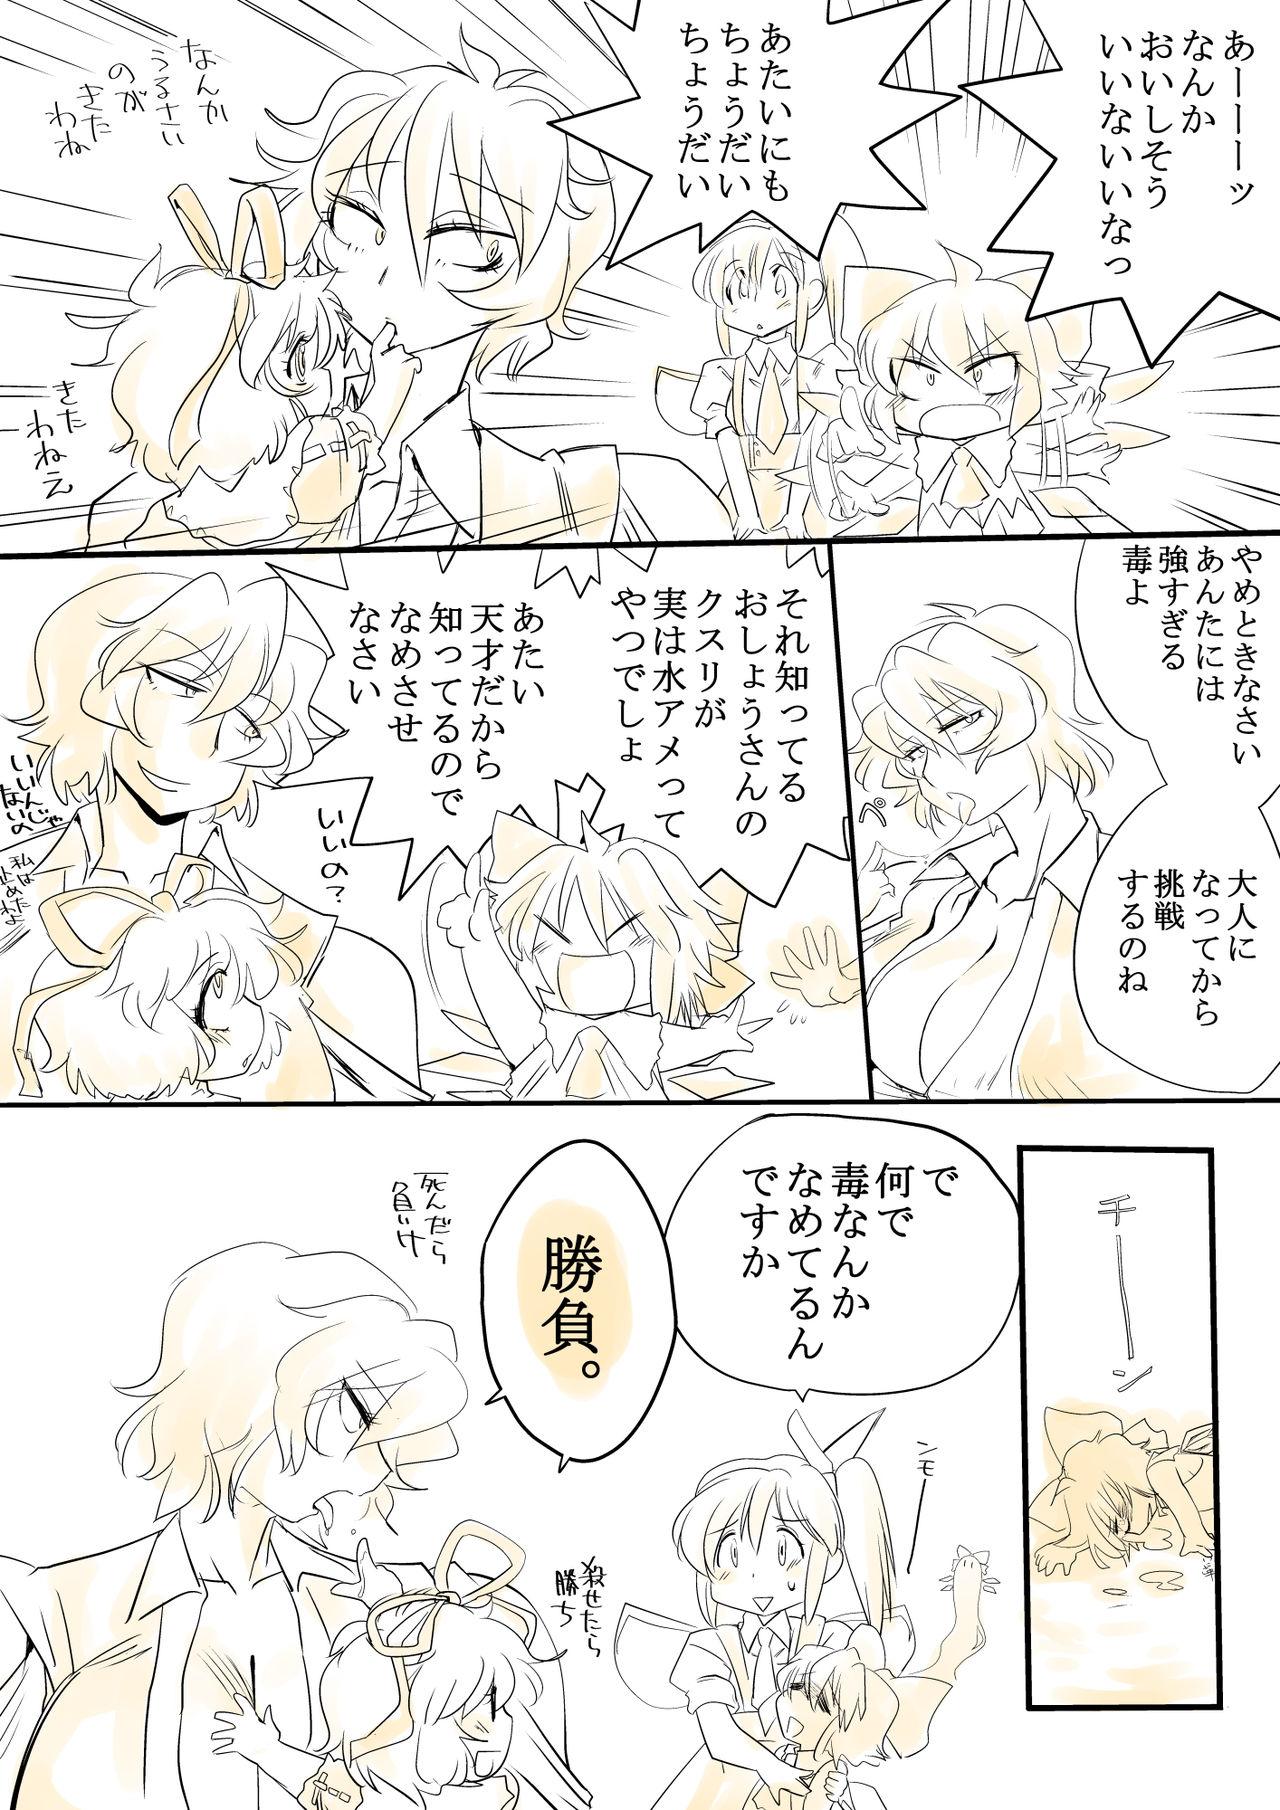 Collar Touhou Request CG Shuu Sono 5 - Touhou project Shemales - Page 5